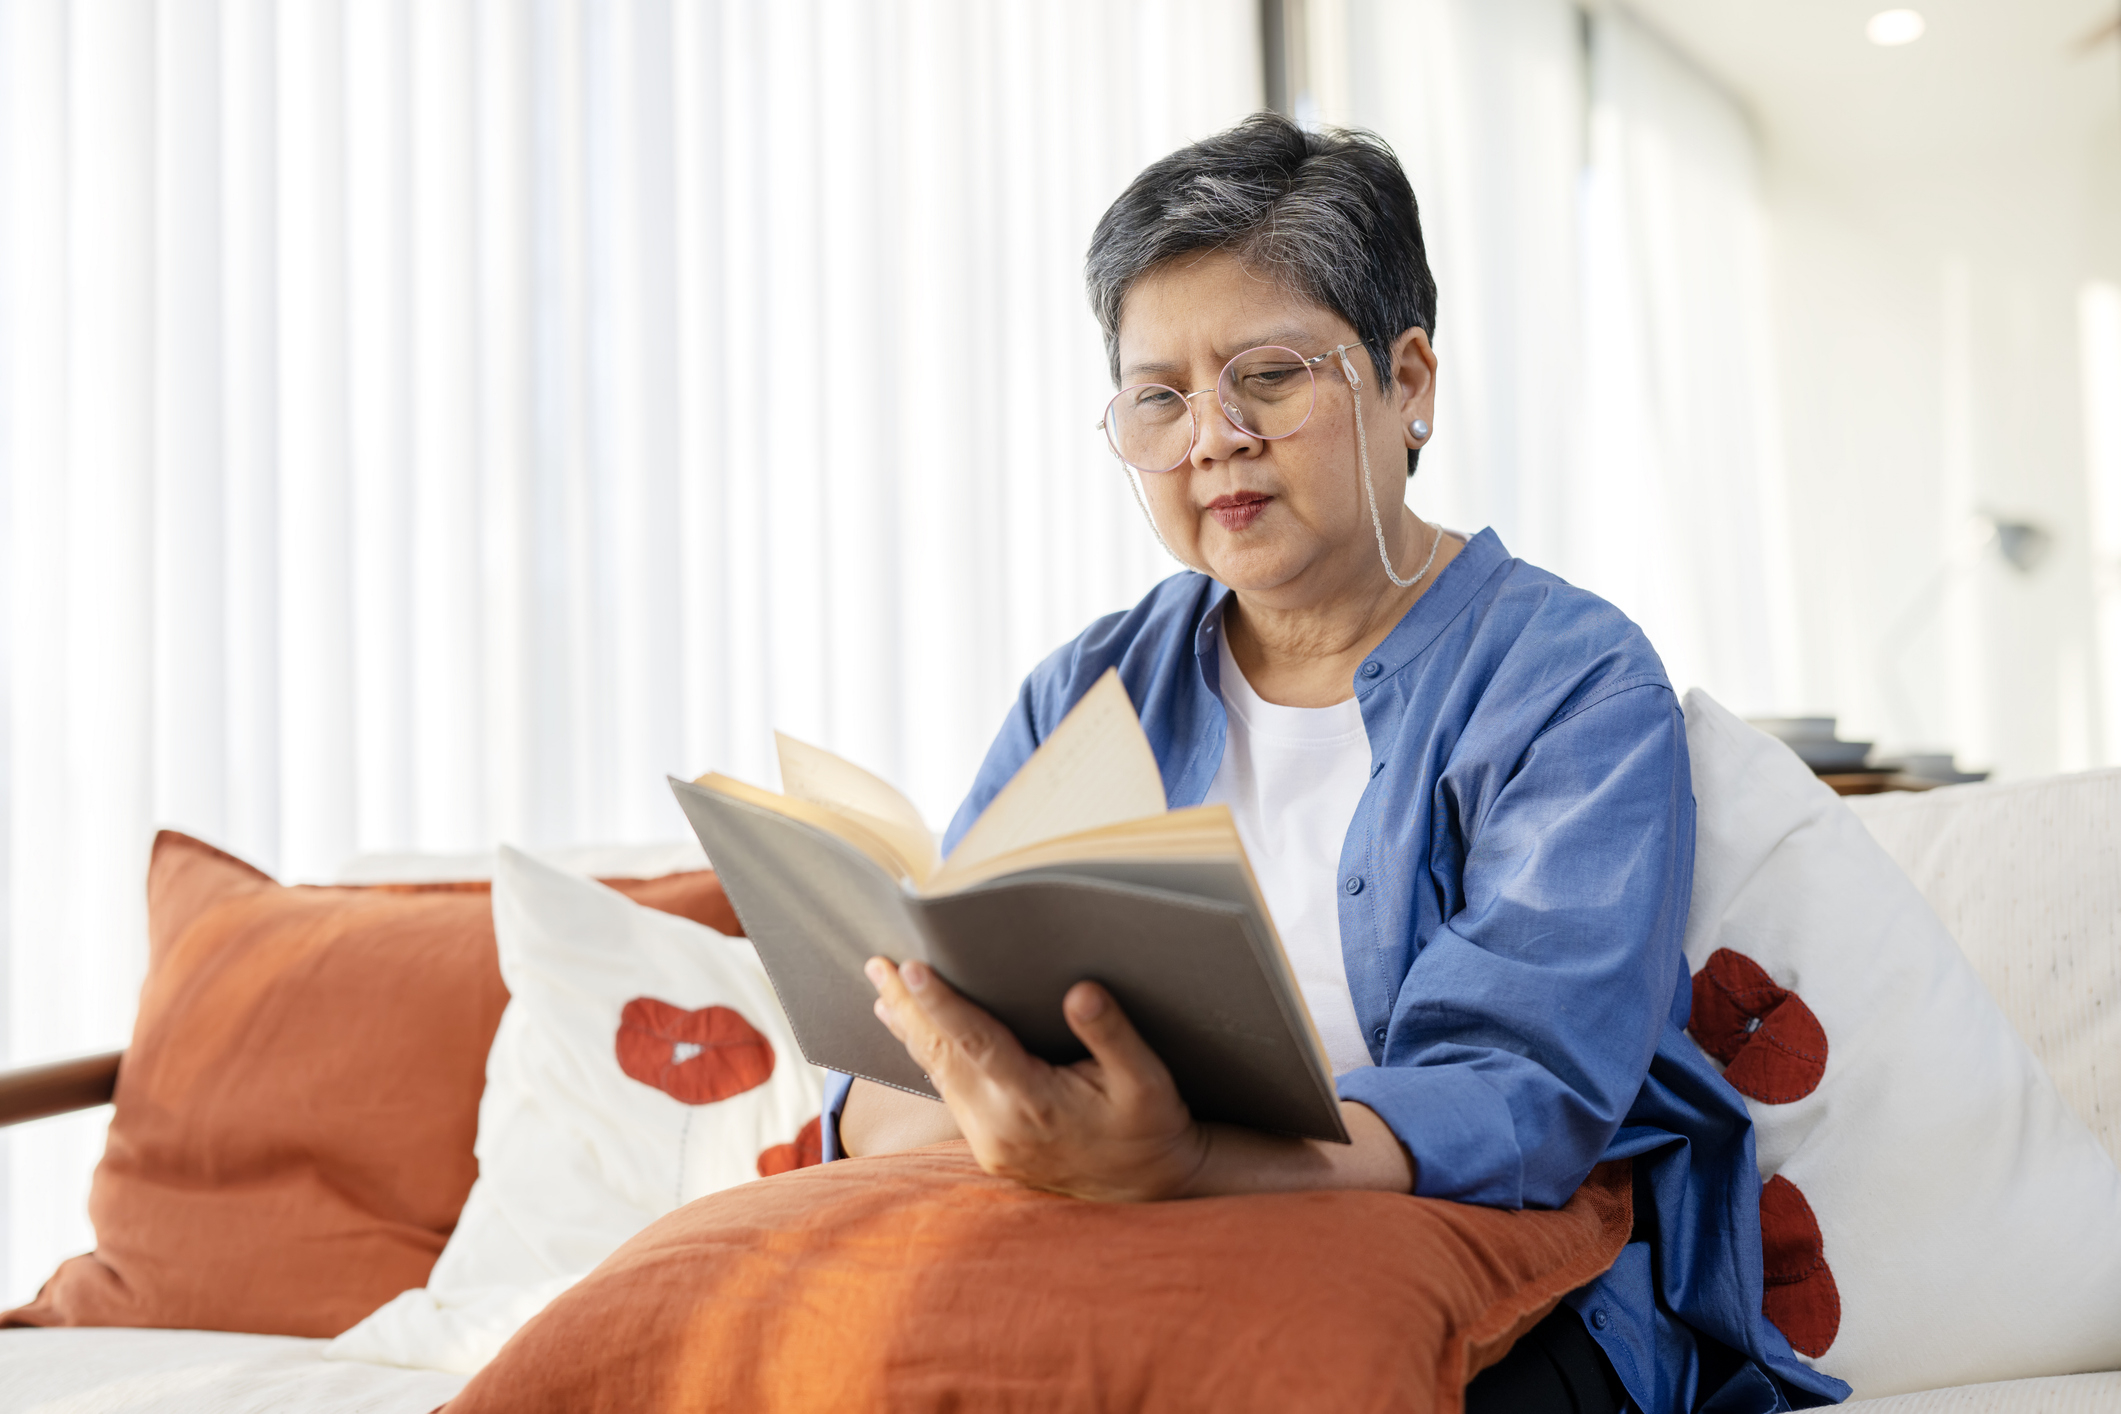 Woman in glasses reading a book on a couch with decorative pillows